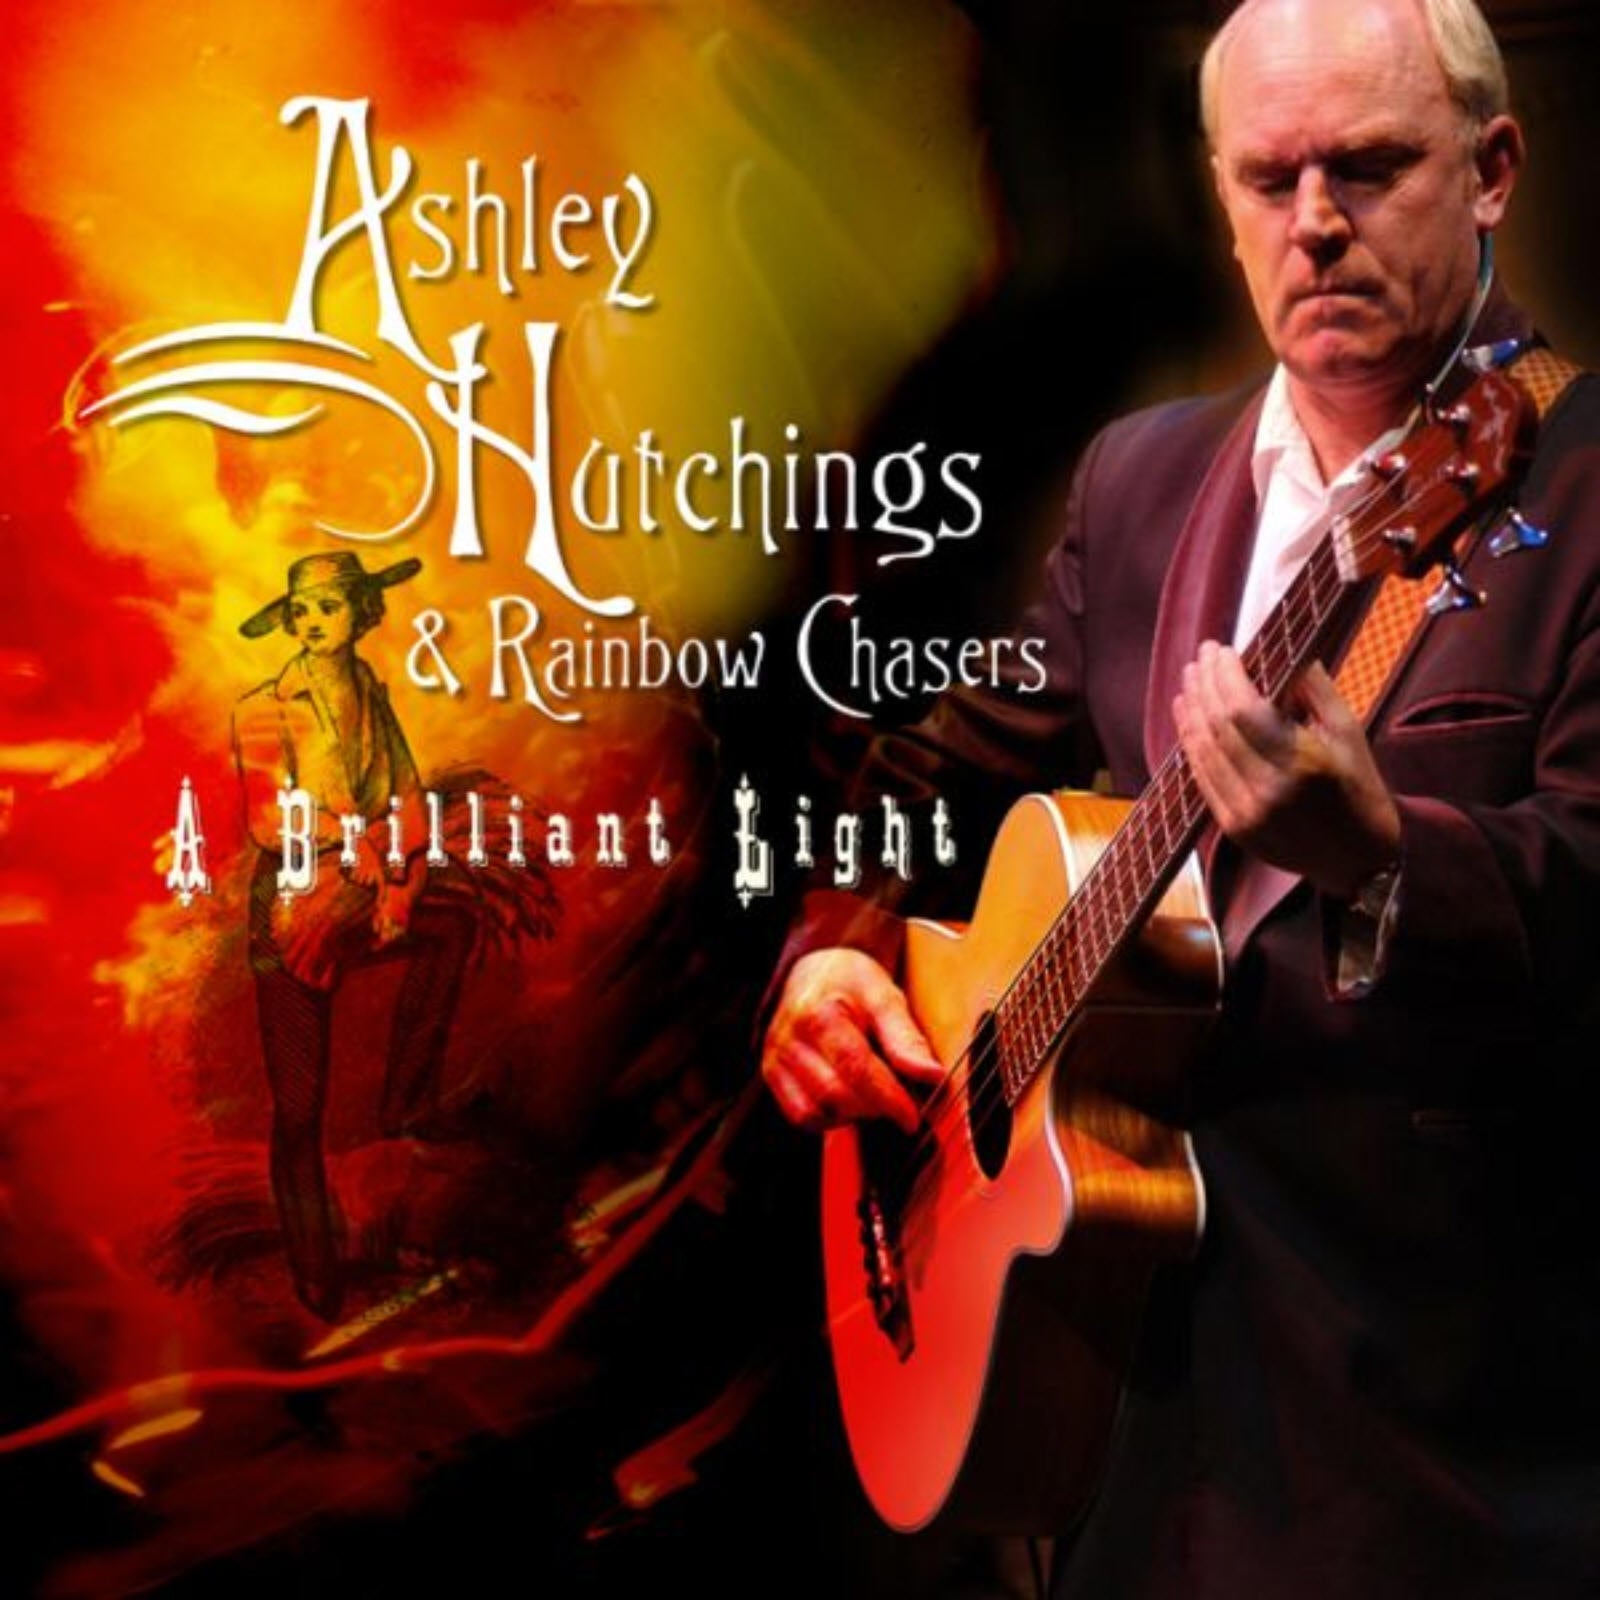 Ashley Hutchings & Rainbow Chasers - A Brilliant Light - 2CD Album - Secret Records Limited